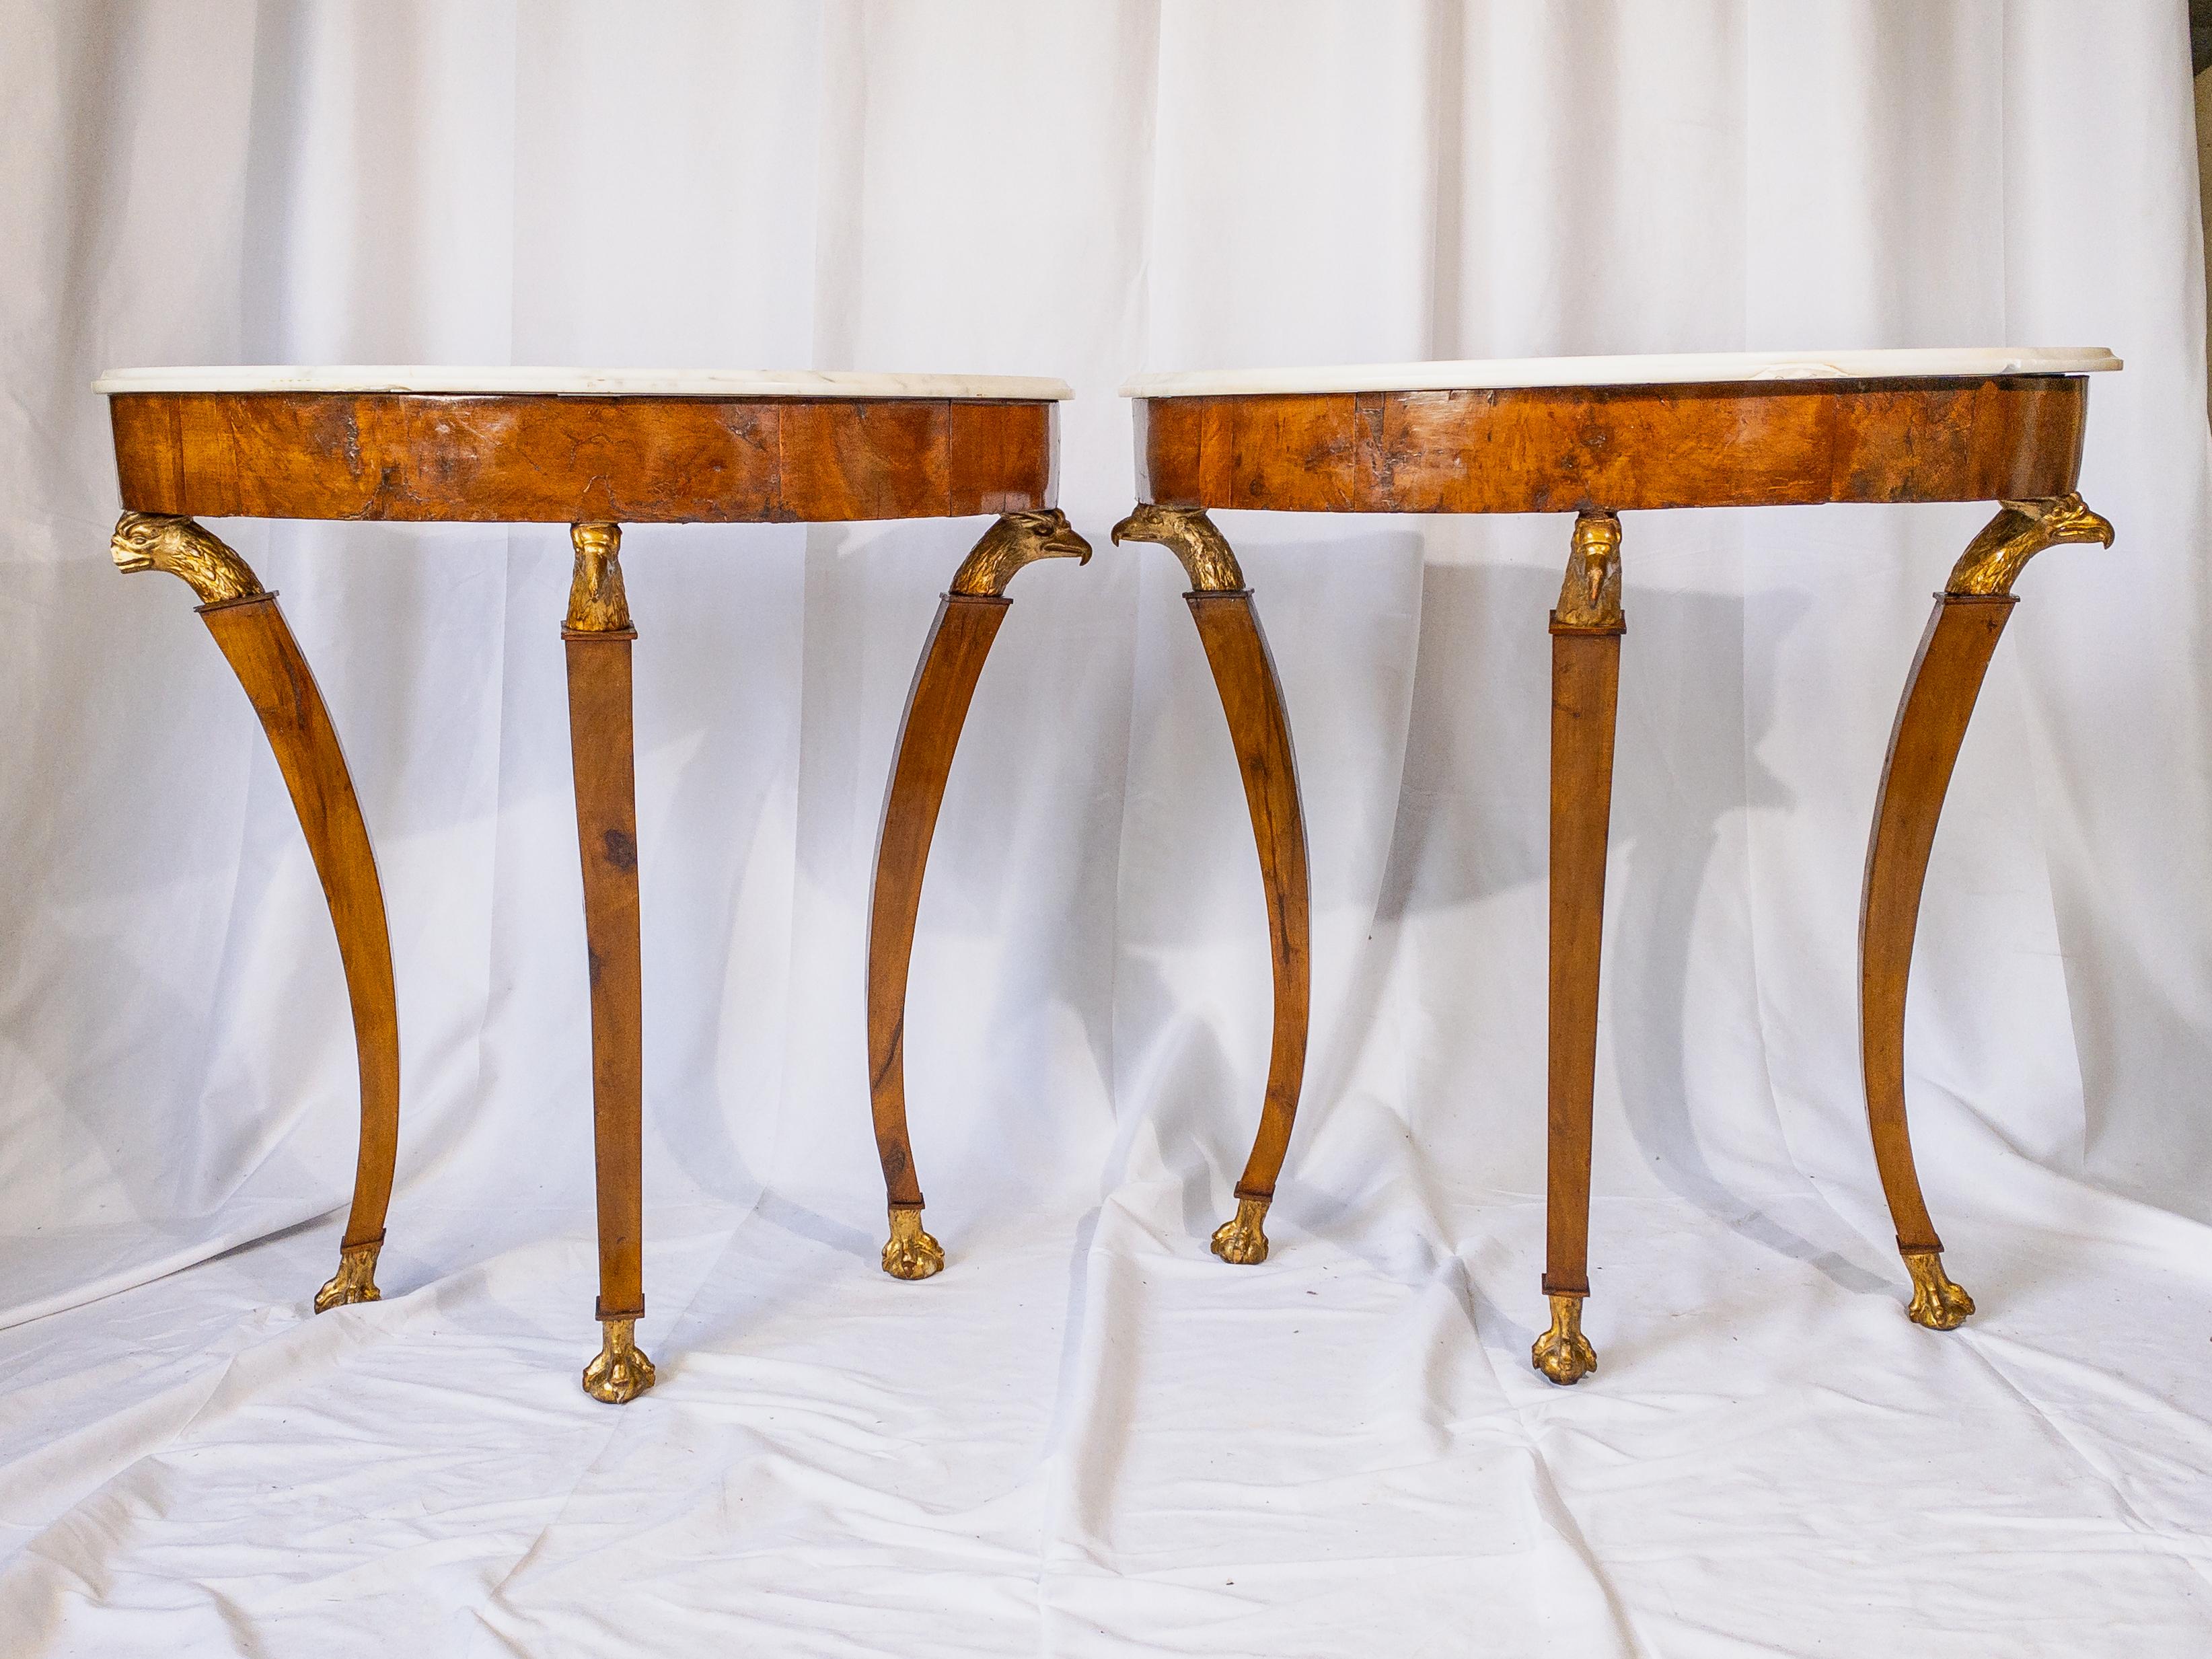 Pair of 18th Century Italian Marble Top Demi-lune Tables In Good Condition For Sale In Houston, TX